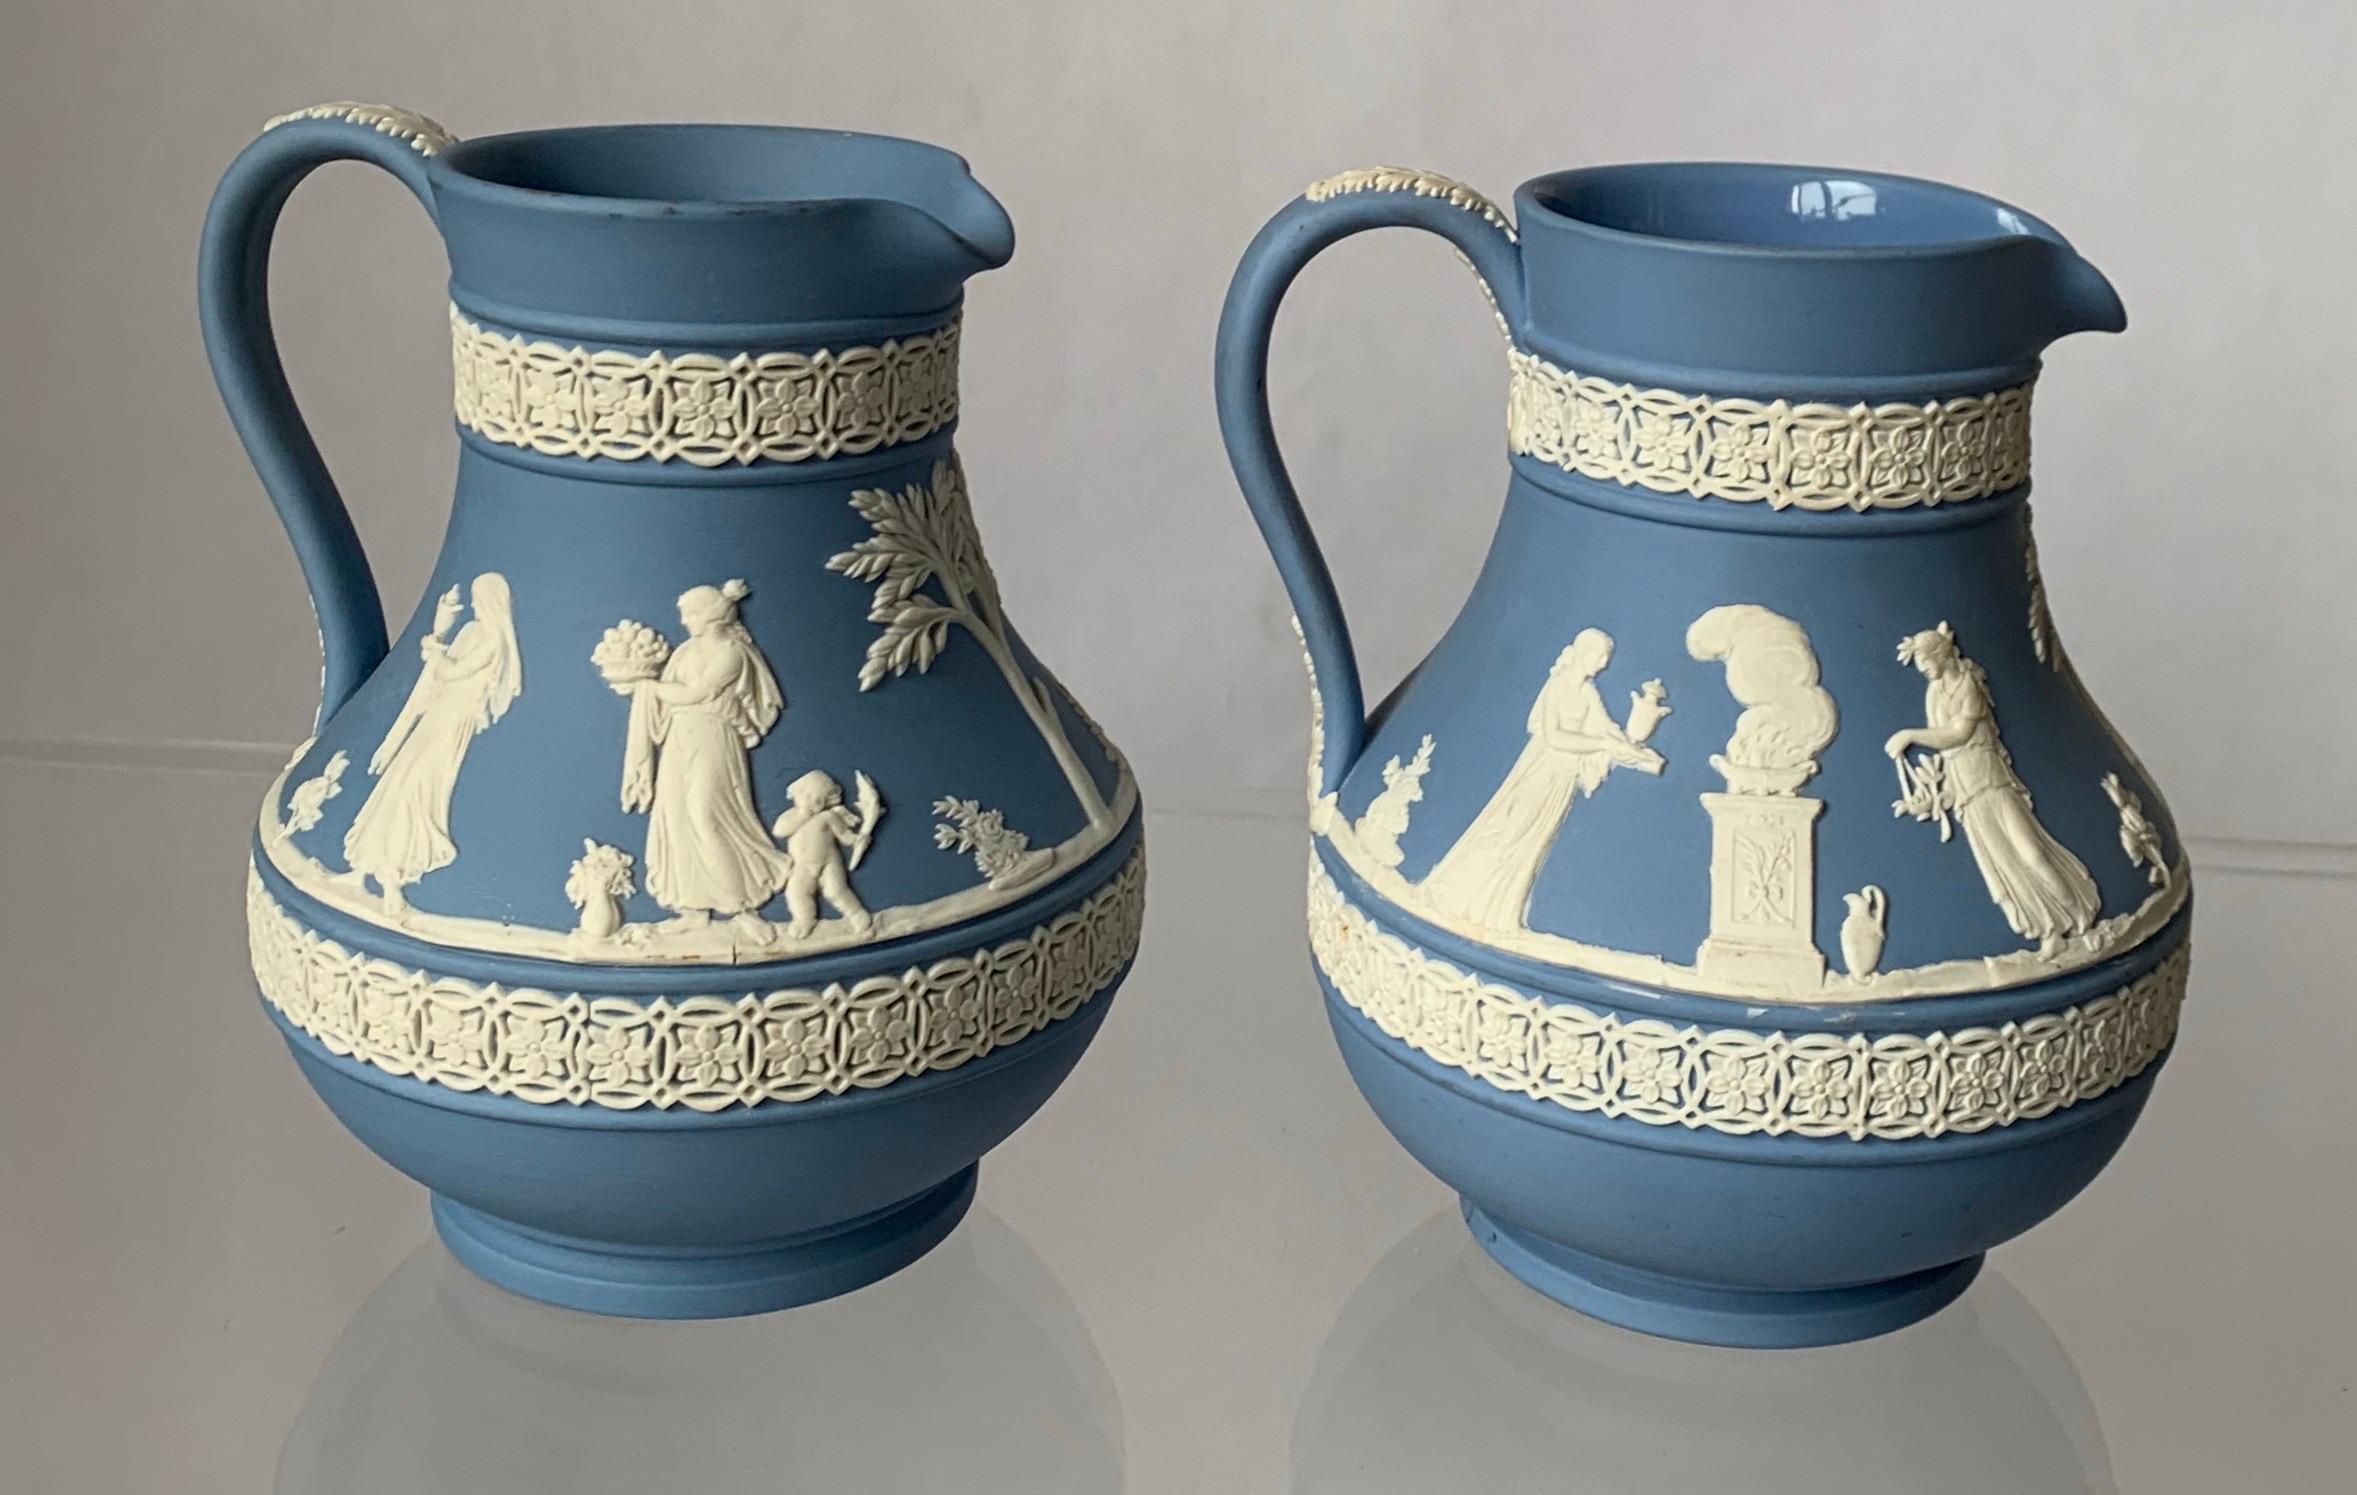 Set of 2 1930s Wedgwood jasperware pitchers. Each pitcher features a neoclassical motif. The pitcher on the right has a glazed interior. Each pitcher stamped Wedgwood on the underside and stamped 35/ 36 (as shown) indicating they were made in the